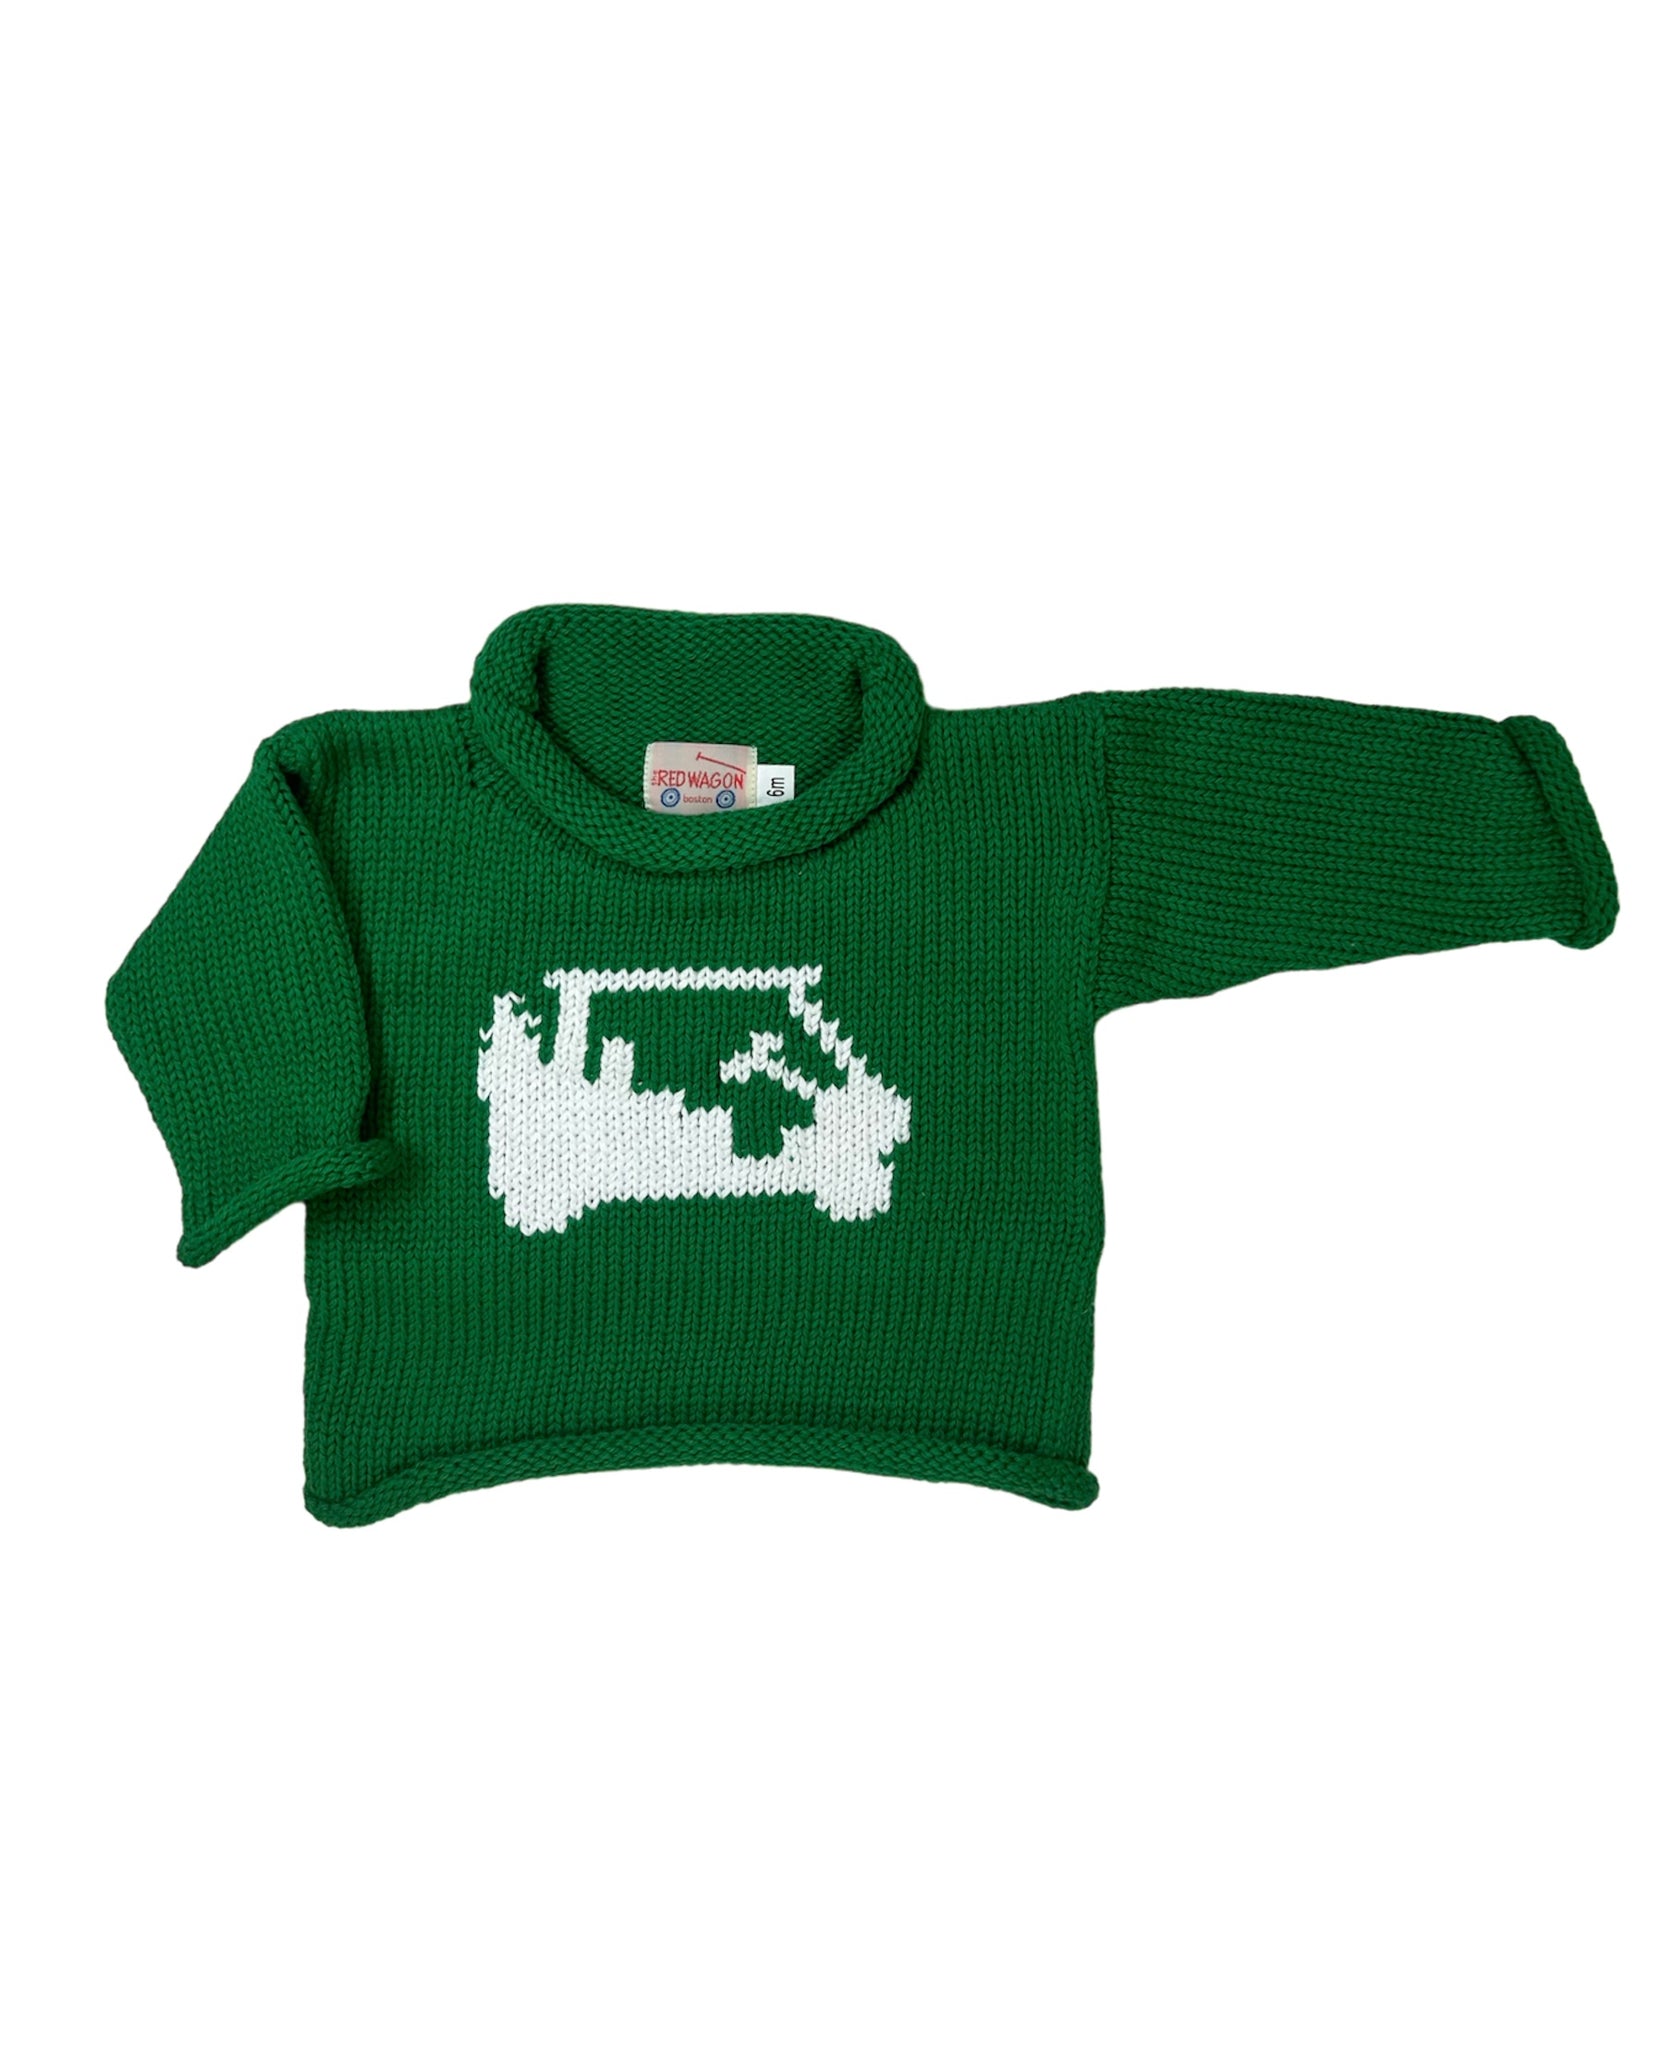 kelly green long sleeve sweater with white golf cart in center